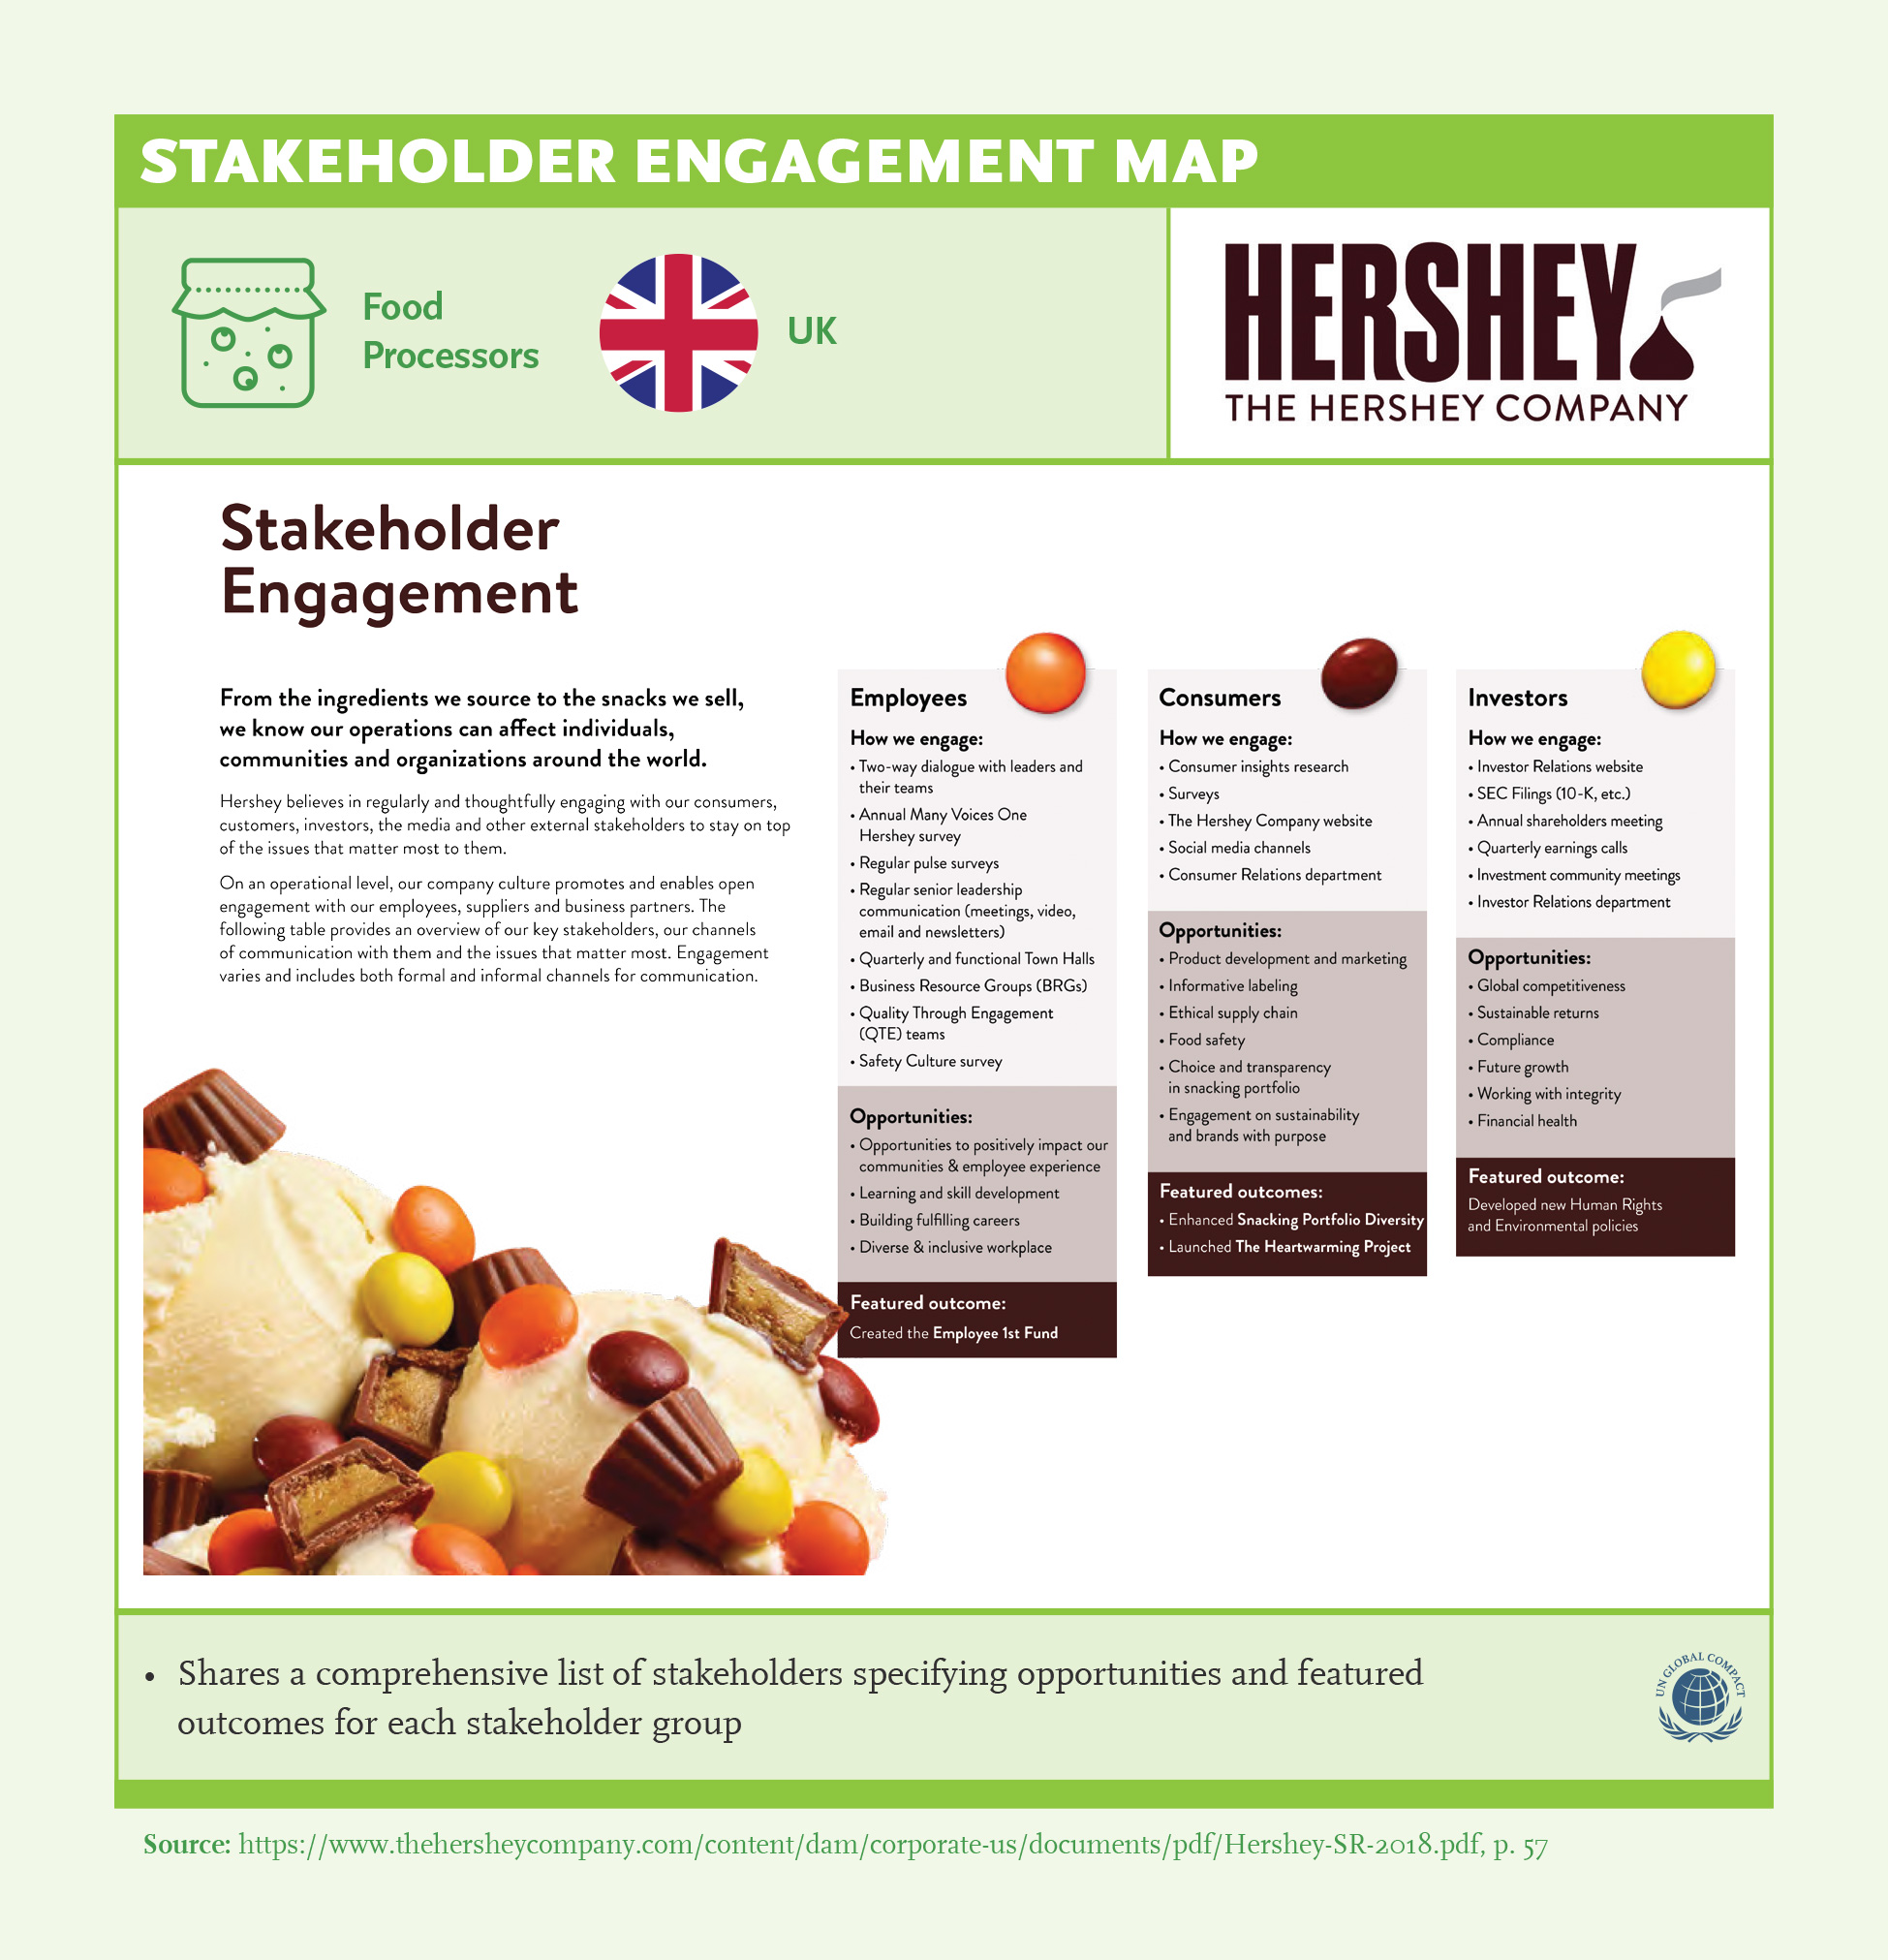 Stakeholder Engagement Map: Hershey’s